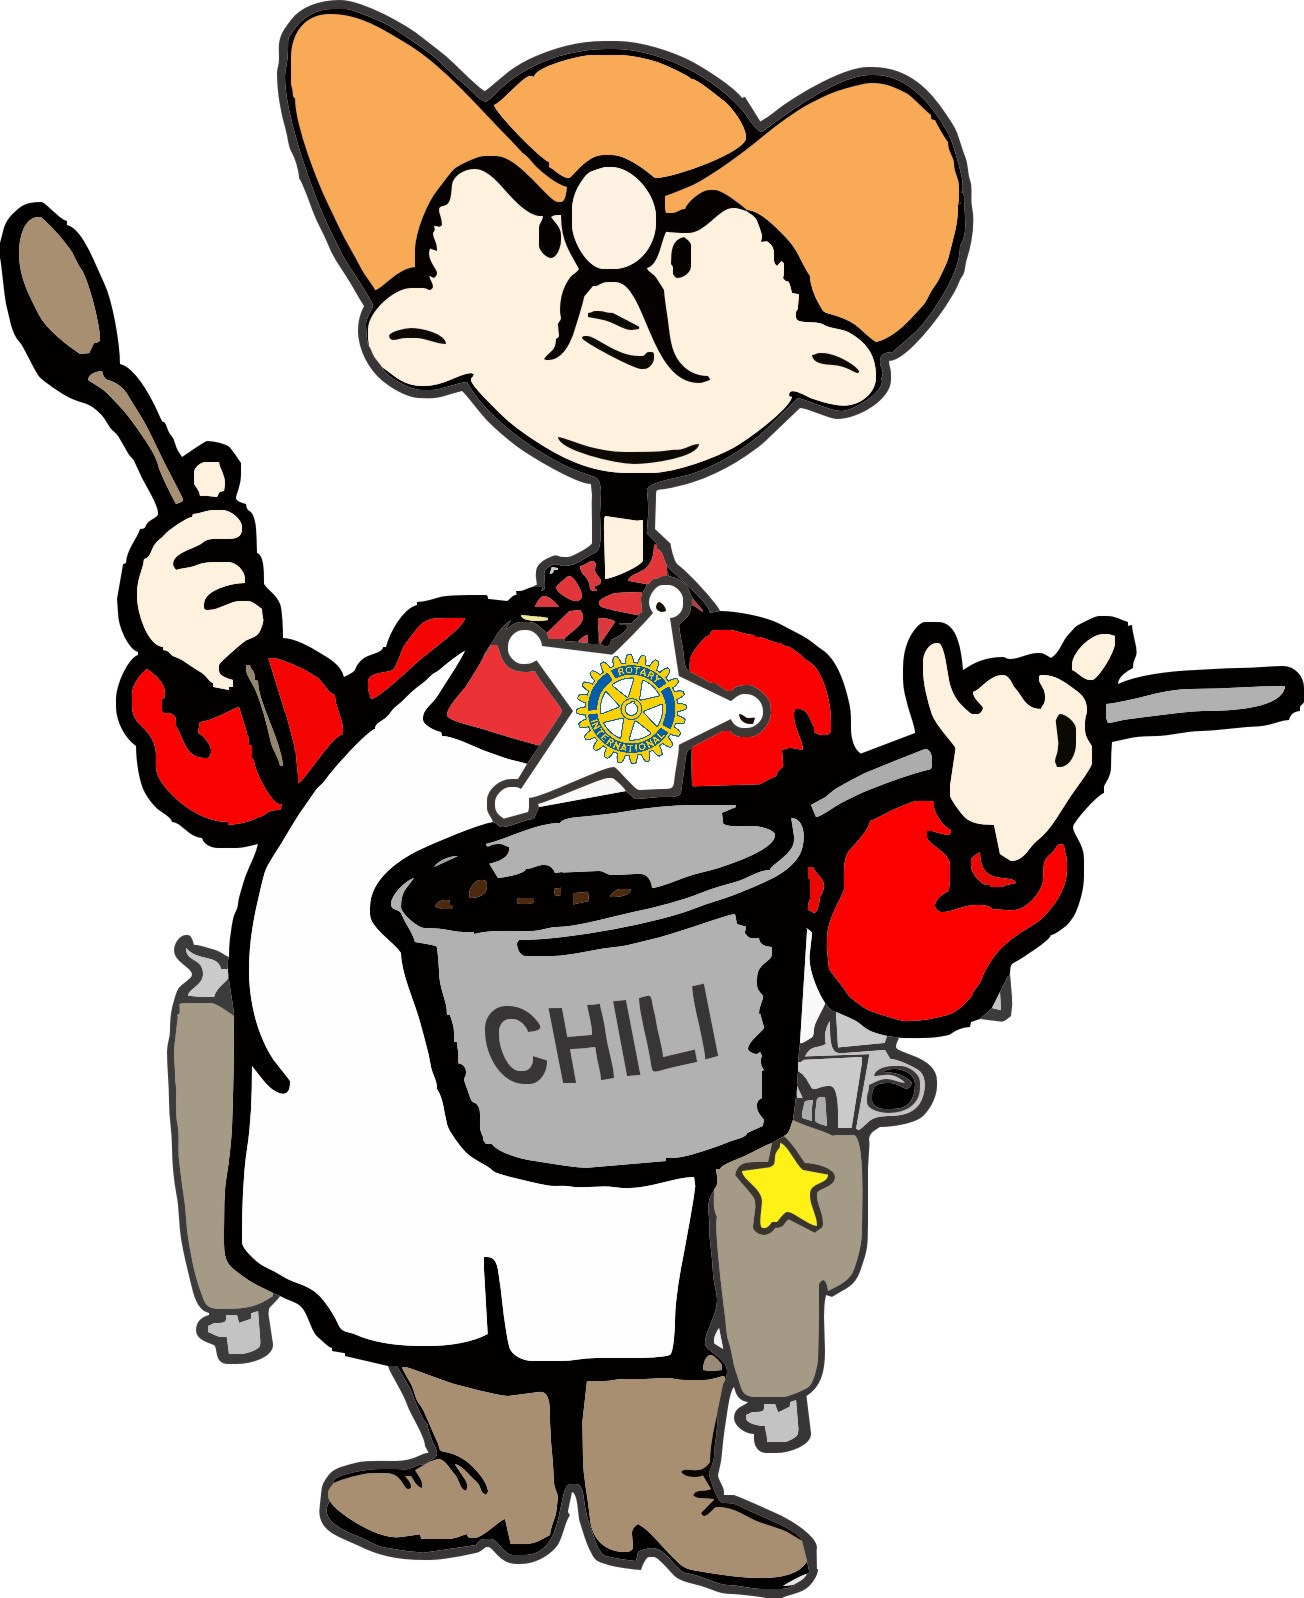 Clip Arts Related To : clip art chili cook off. 